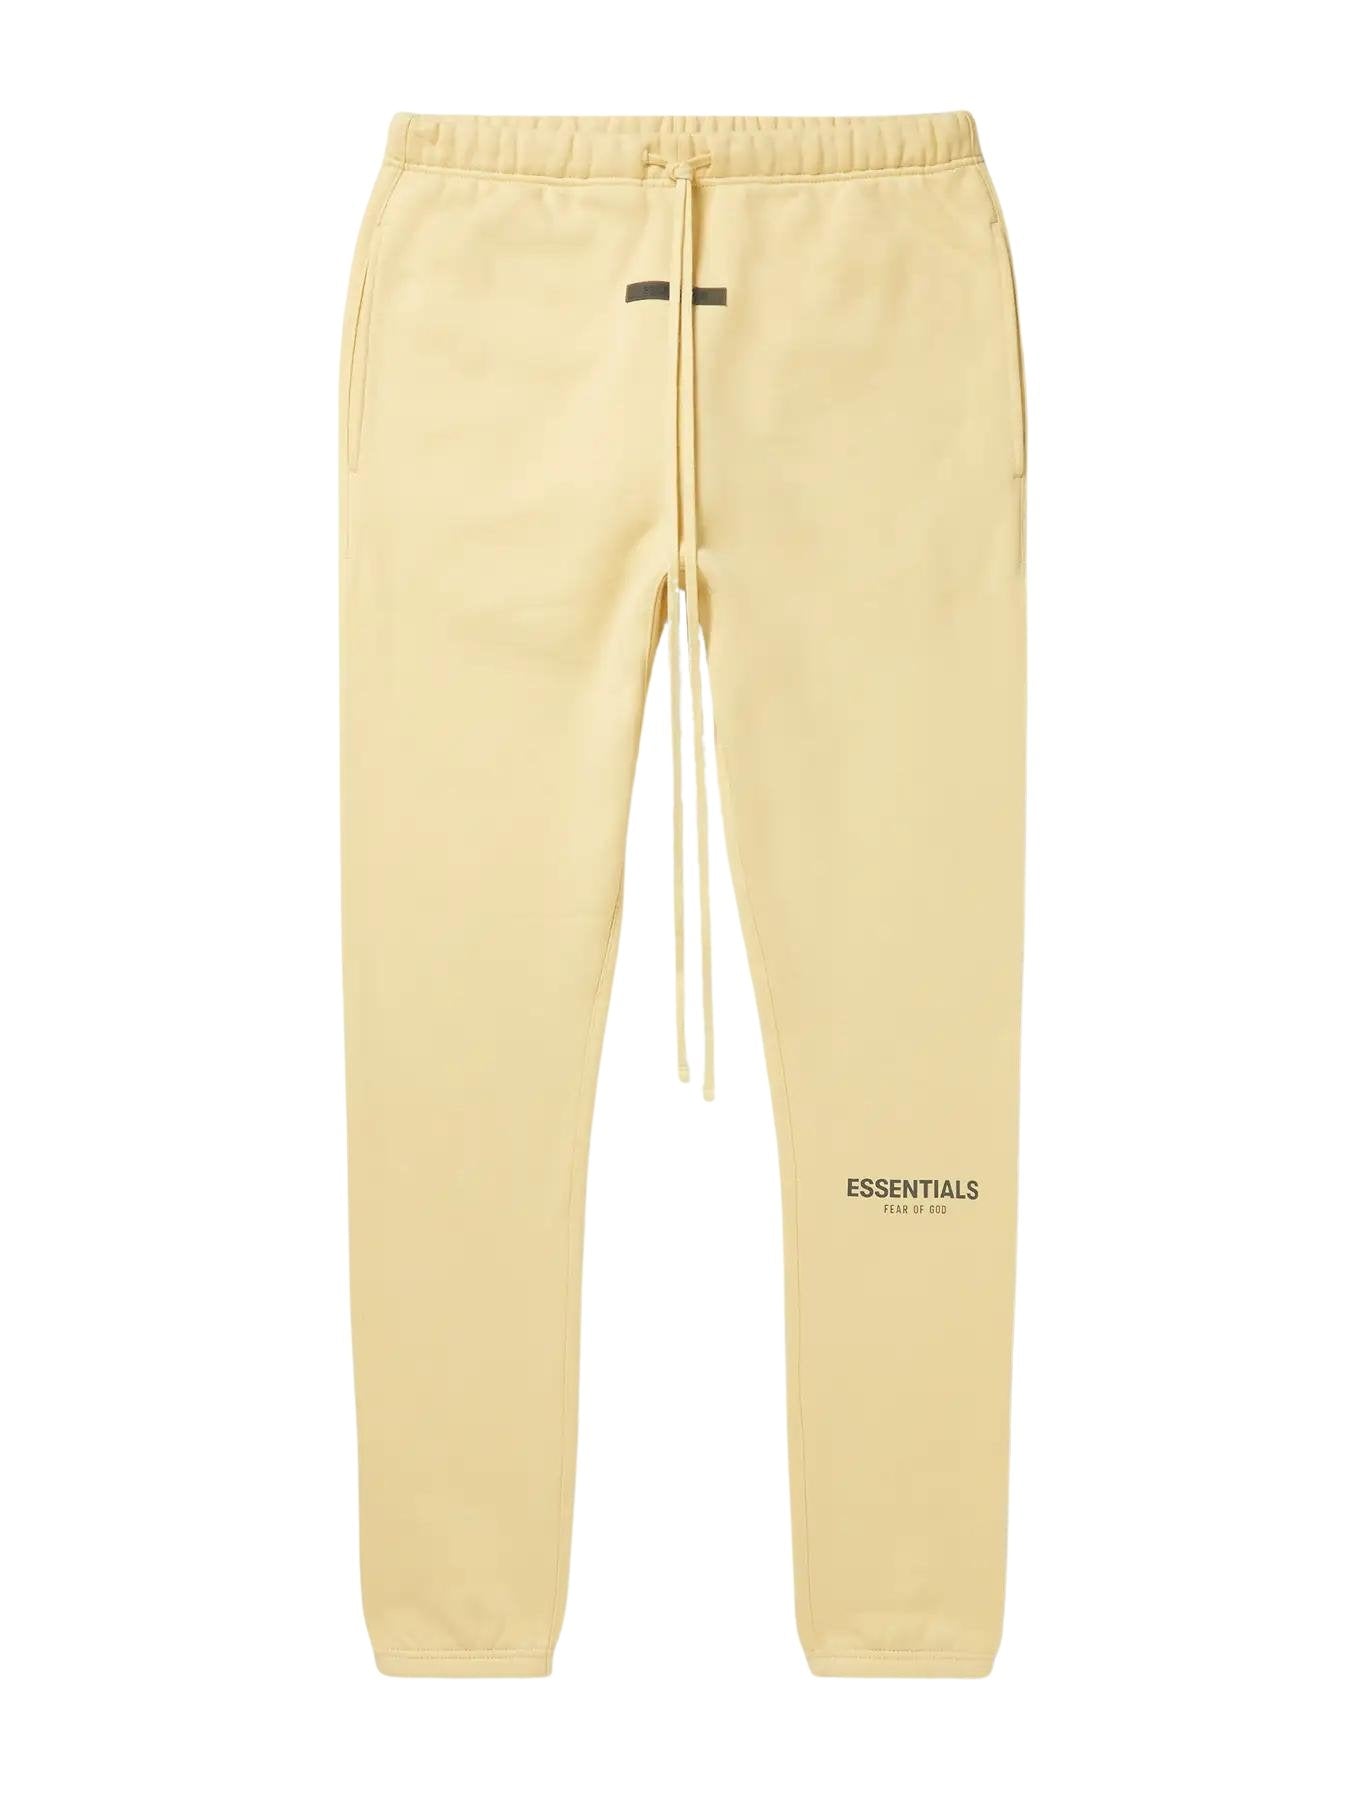 FEAR OF GOD ESSENTIALS CREAM CORE COLLECTION TRACKSUIT - Hype Locker UK